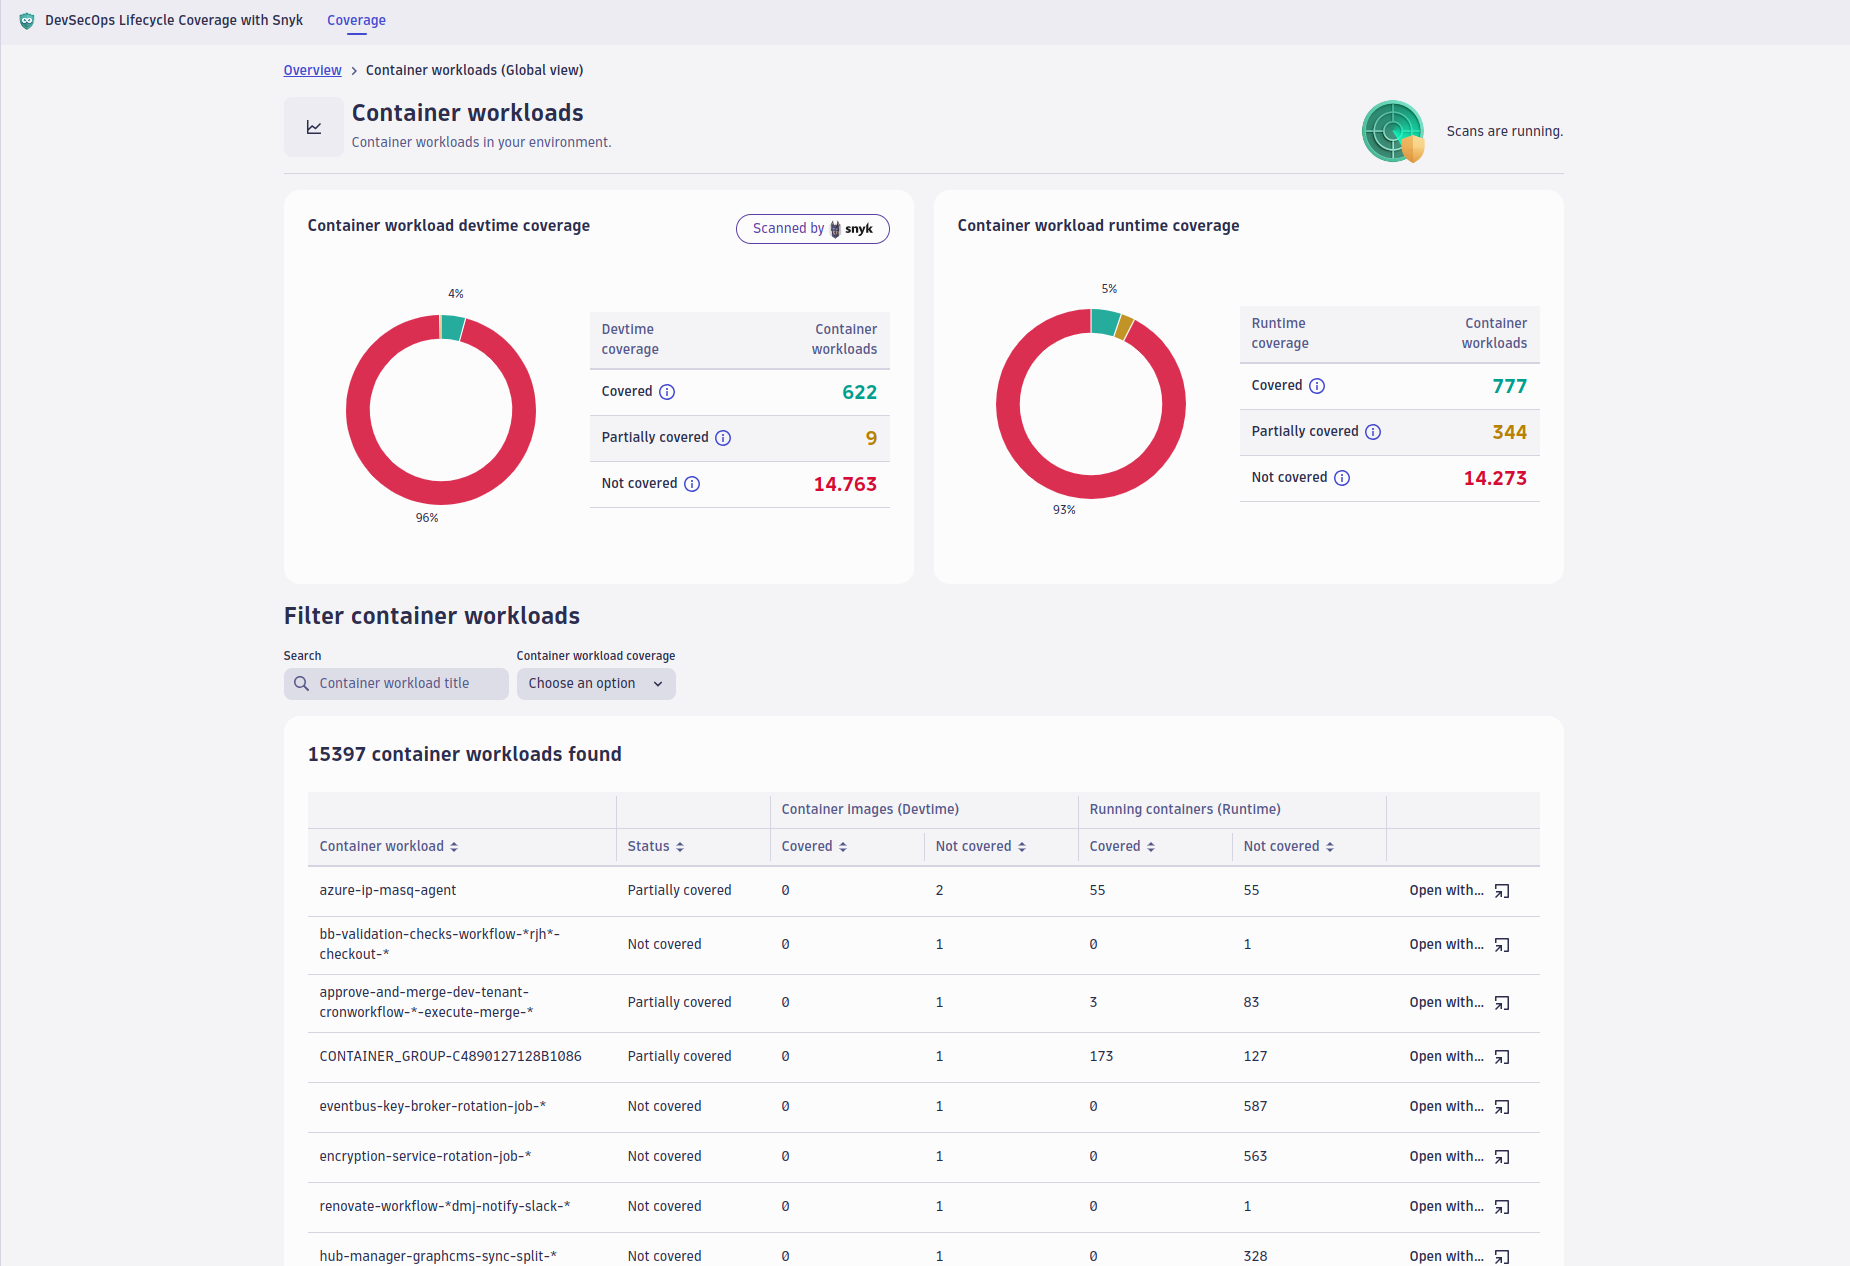 The DevSecOps Lifecycle Coverage app's container workload overview.